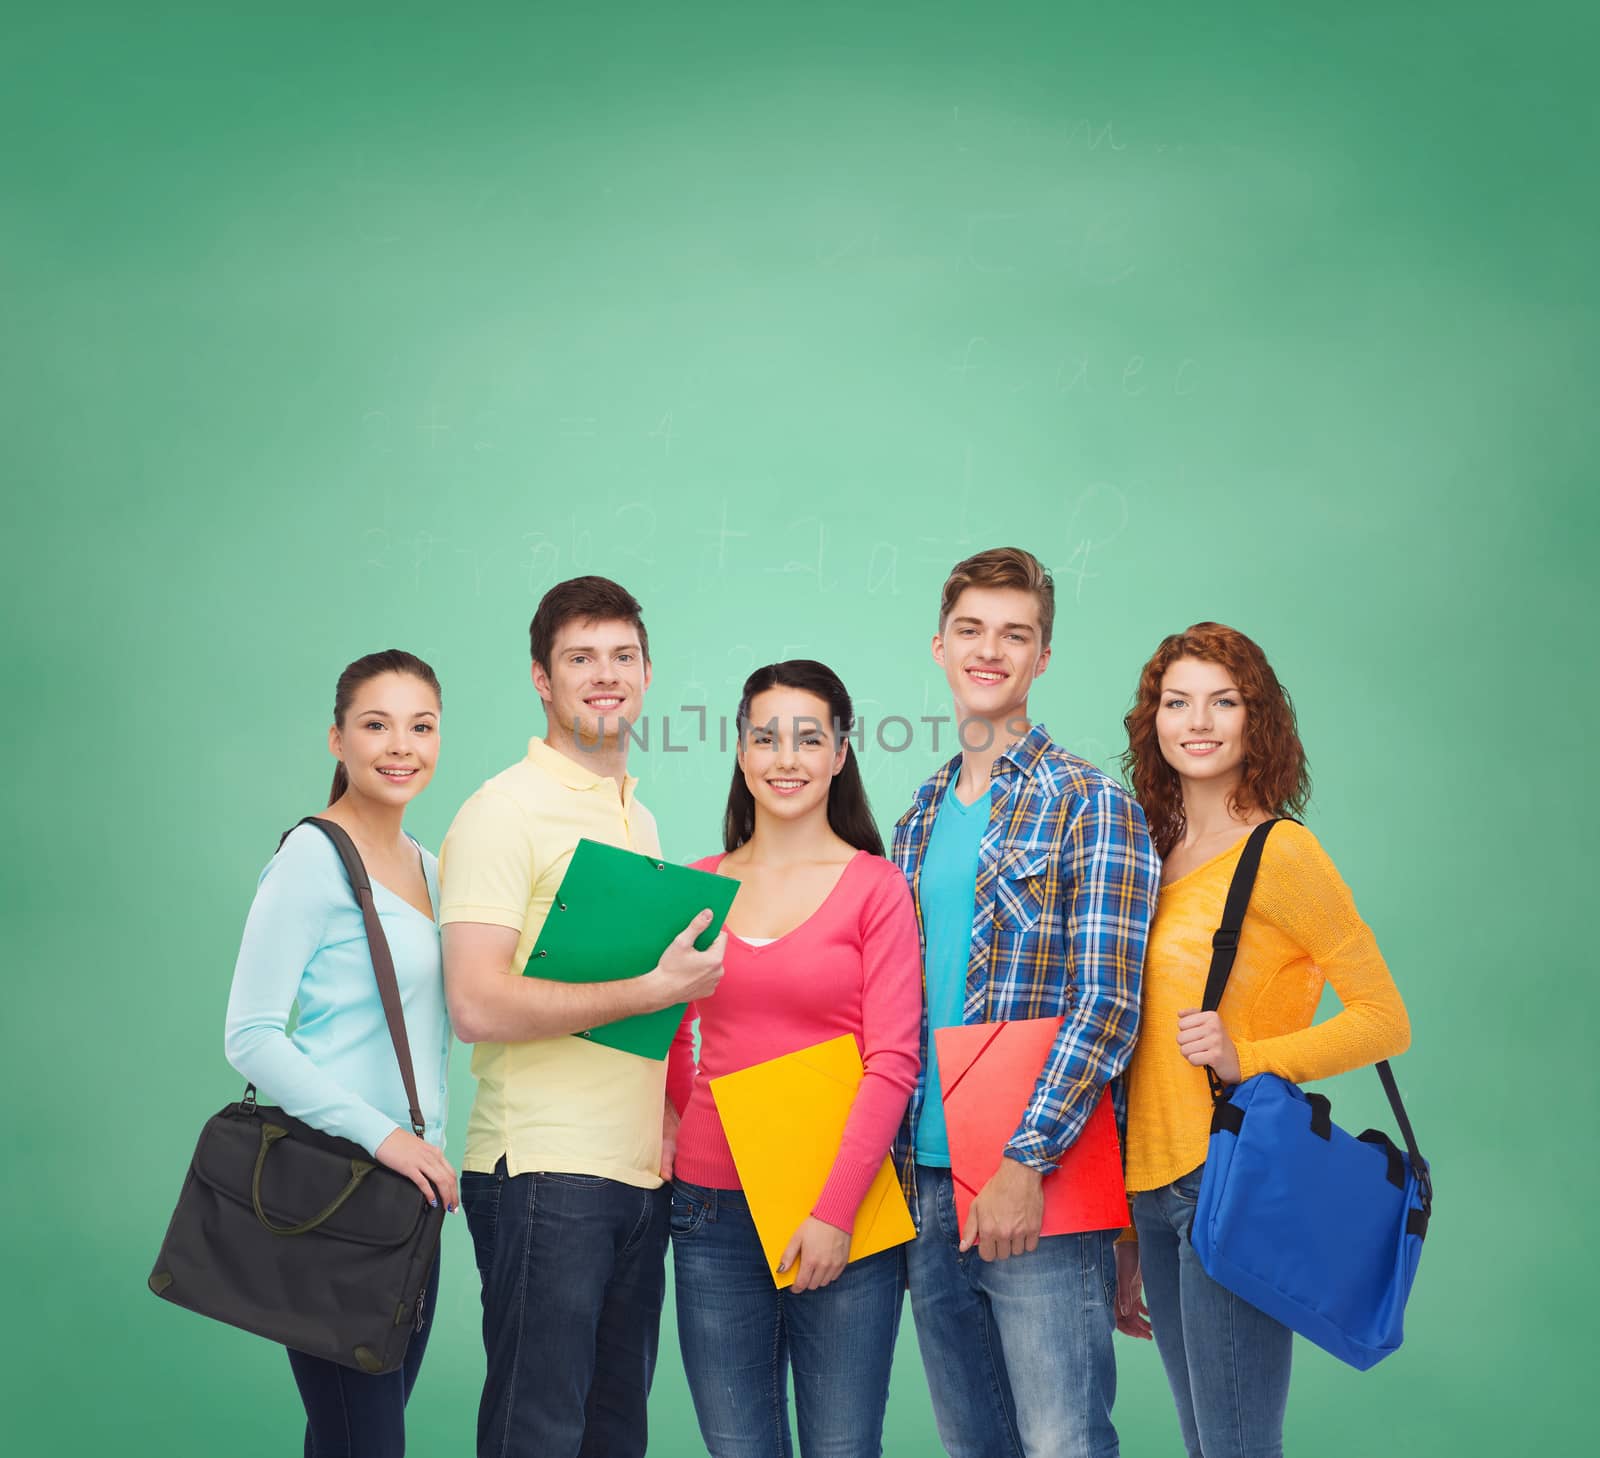 friendship, education and people concept - group of smiling teenagers with folders and school bags over green board background